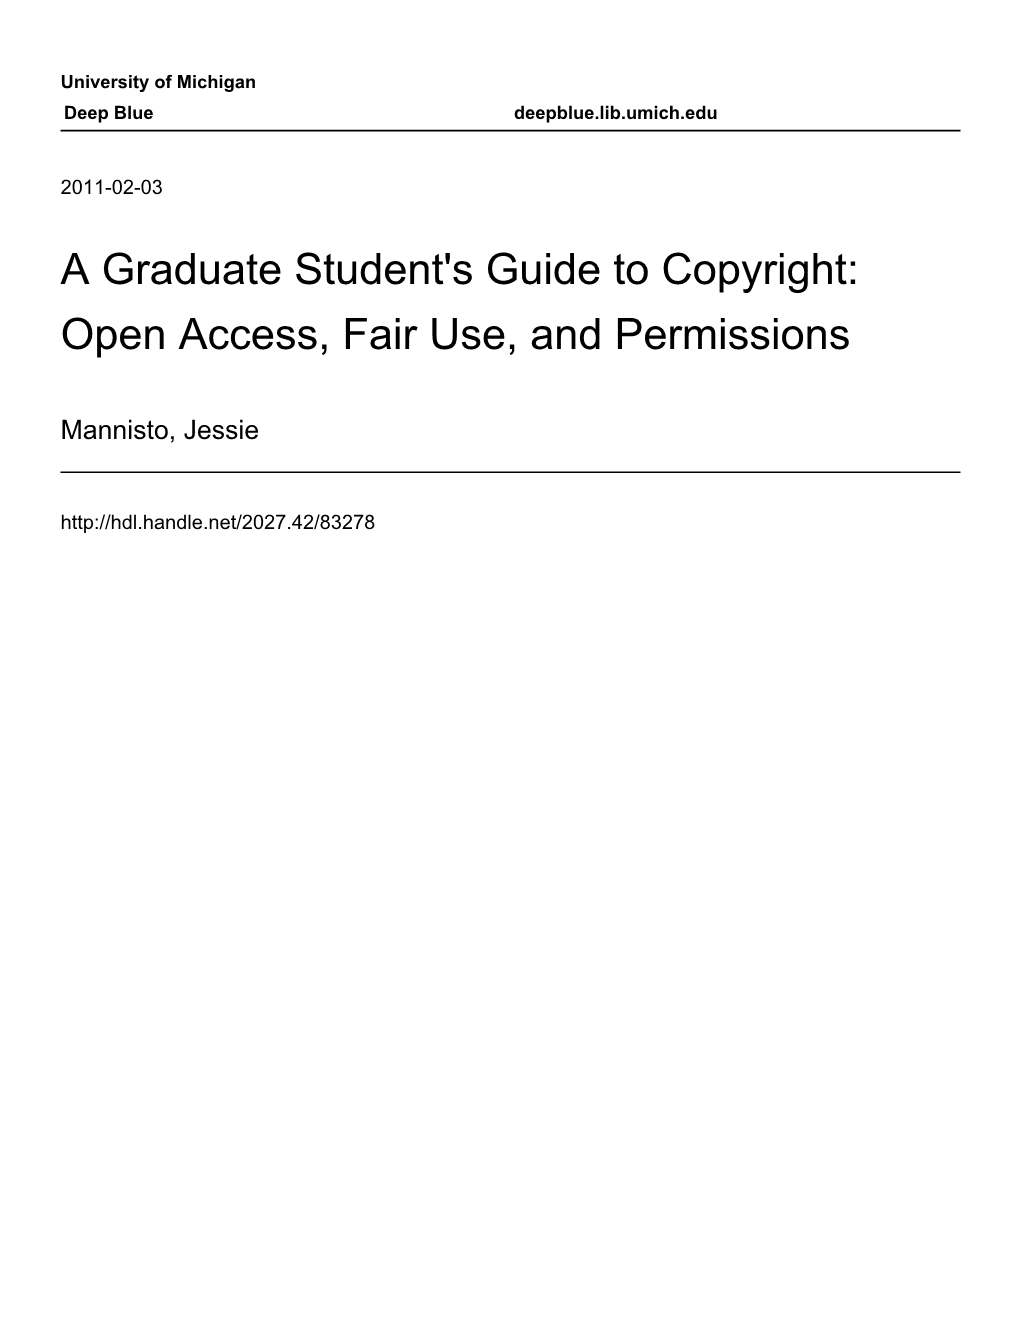 Open Access, Fair Use, and Permissions